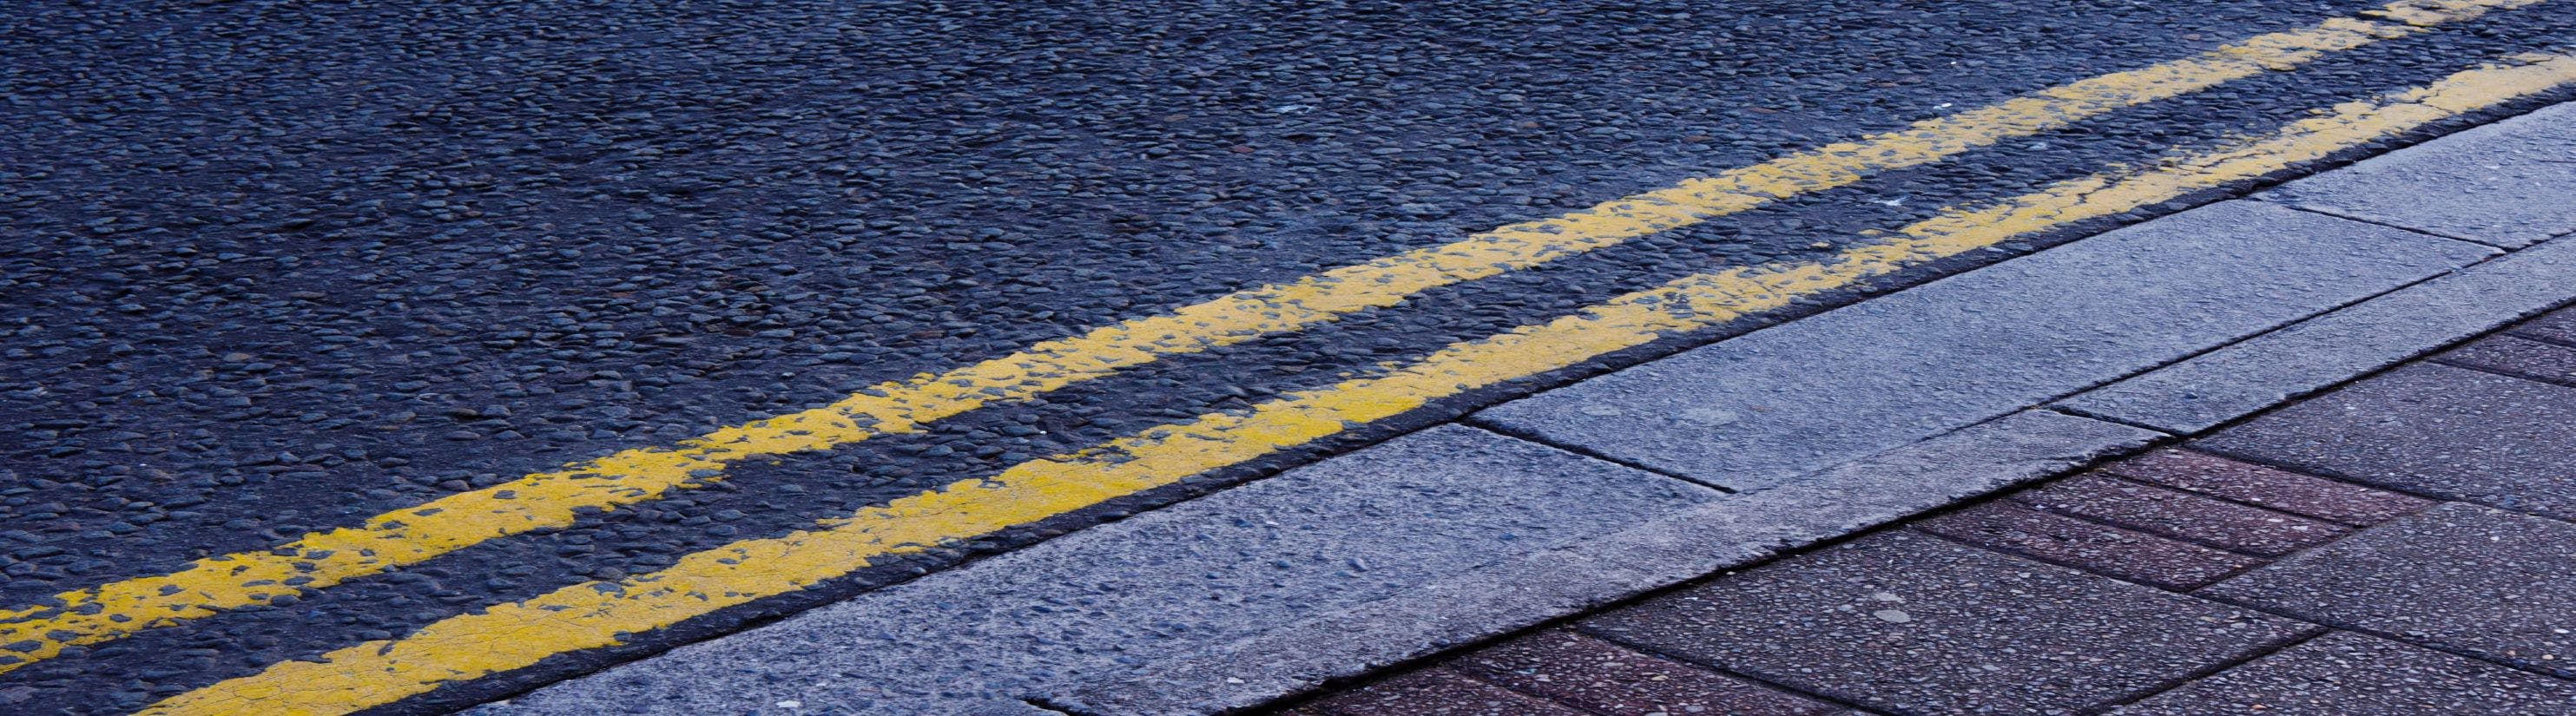 Photo of double yellow lines on road.